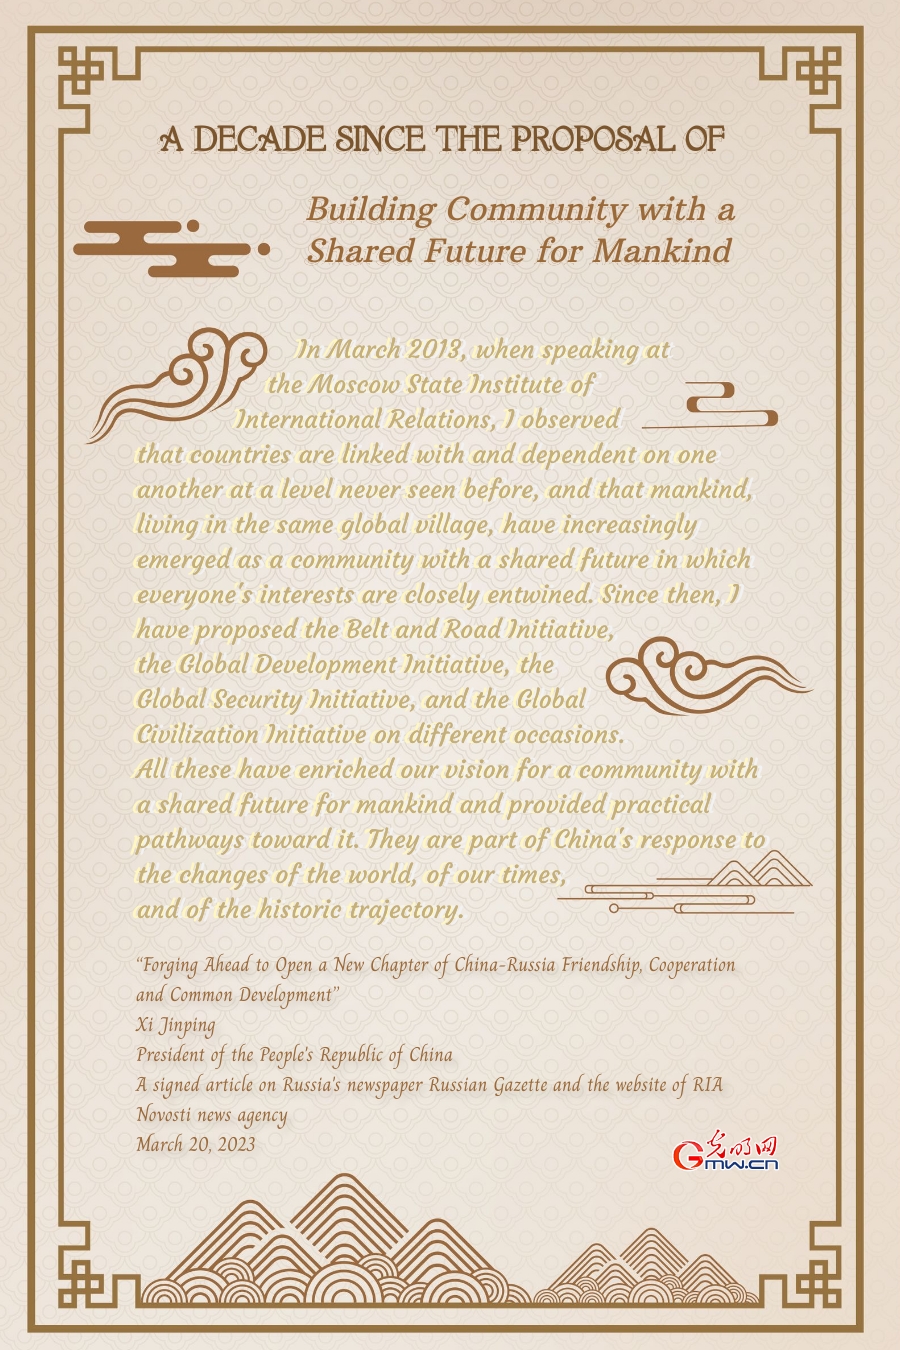 Review: A decade since the proposal of building community with a shared future for mankind